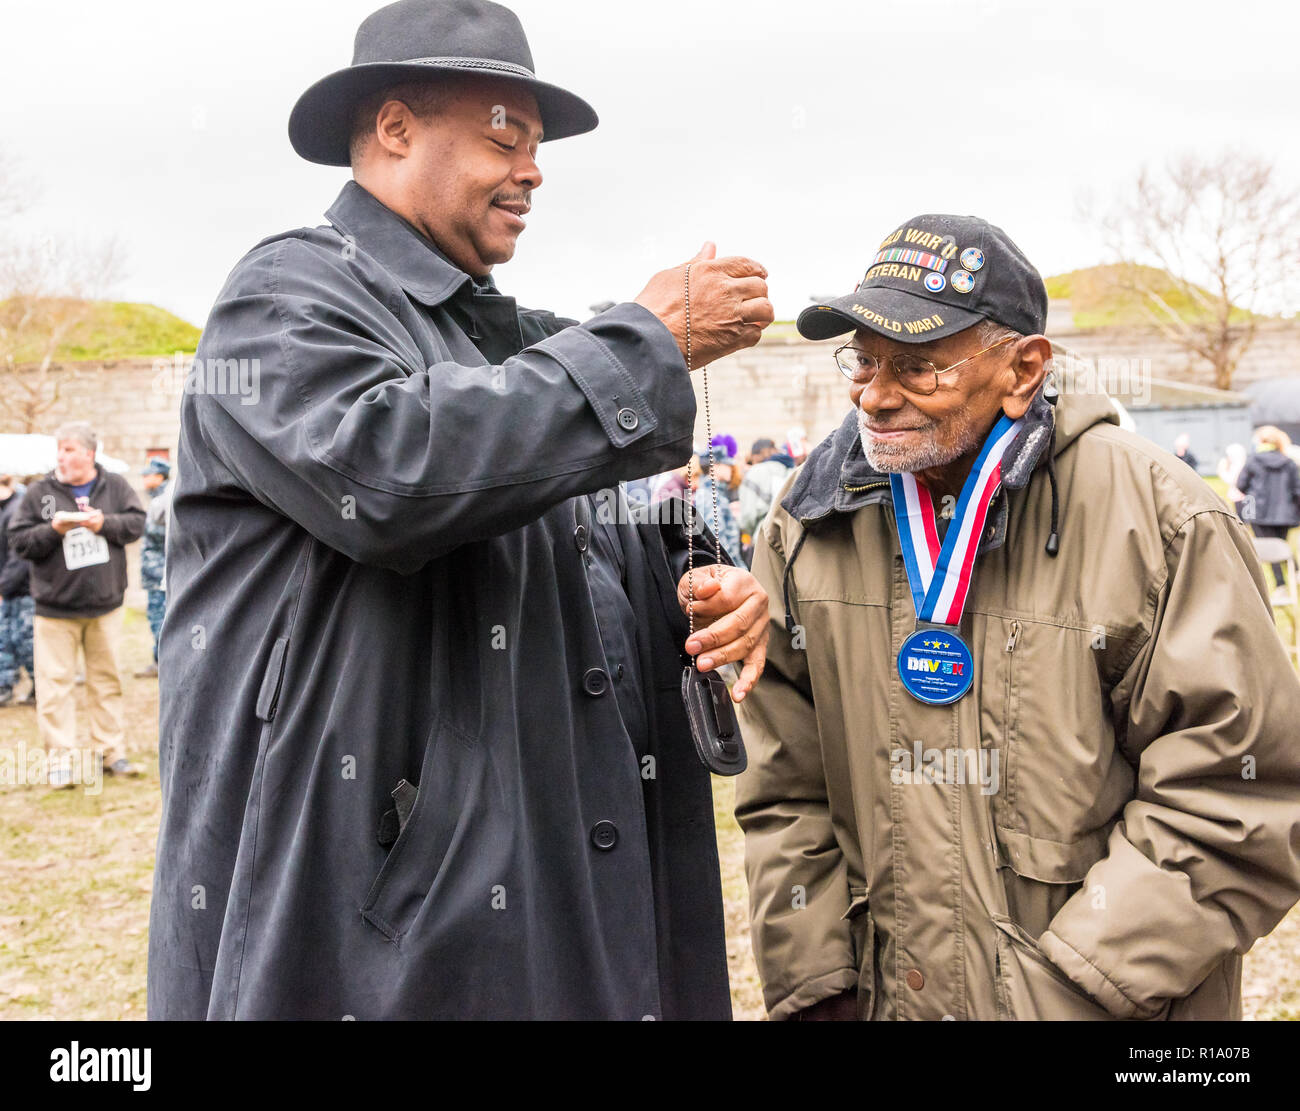 Boston, Massachusetts, USA. 10th November, 2018. At the Disabled American Veterans 5k charity event Boston Police Commissioner William Gross takes his police badge off from around his neck to place around the neck of a World War II veteran, thanking him for his service. Maia Kennedy/Alamy Live News Stock Photo